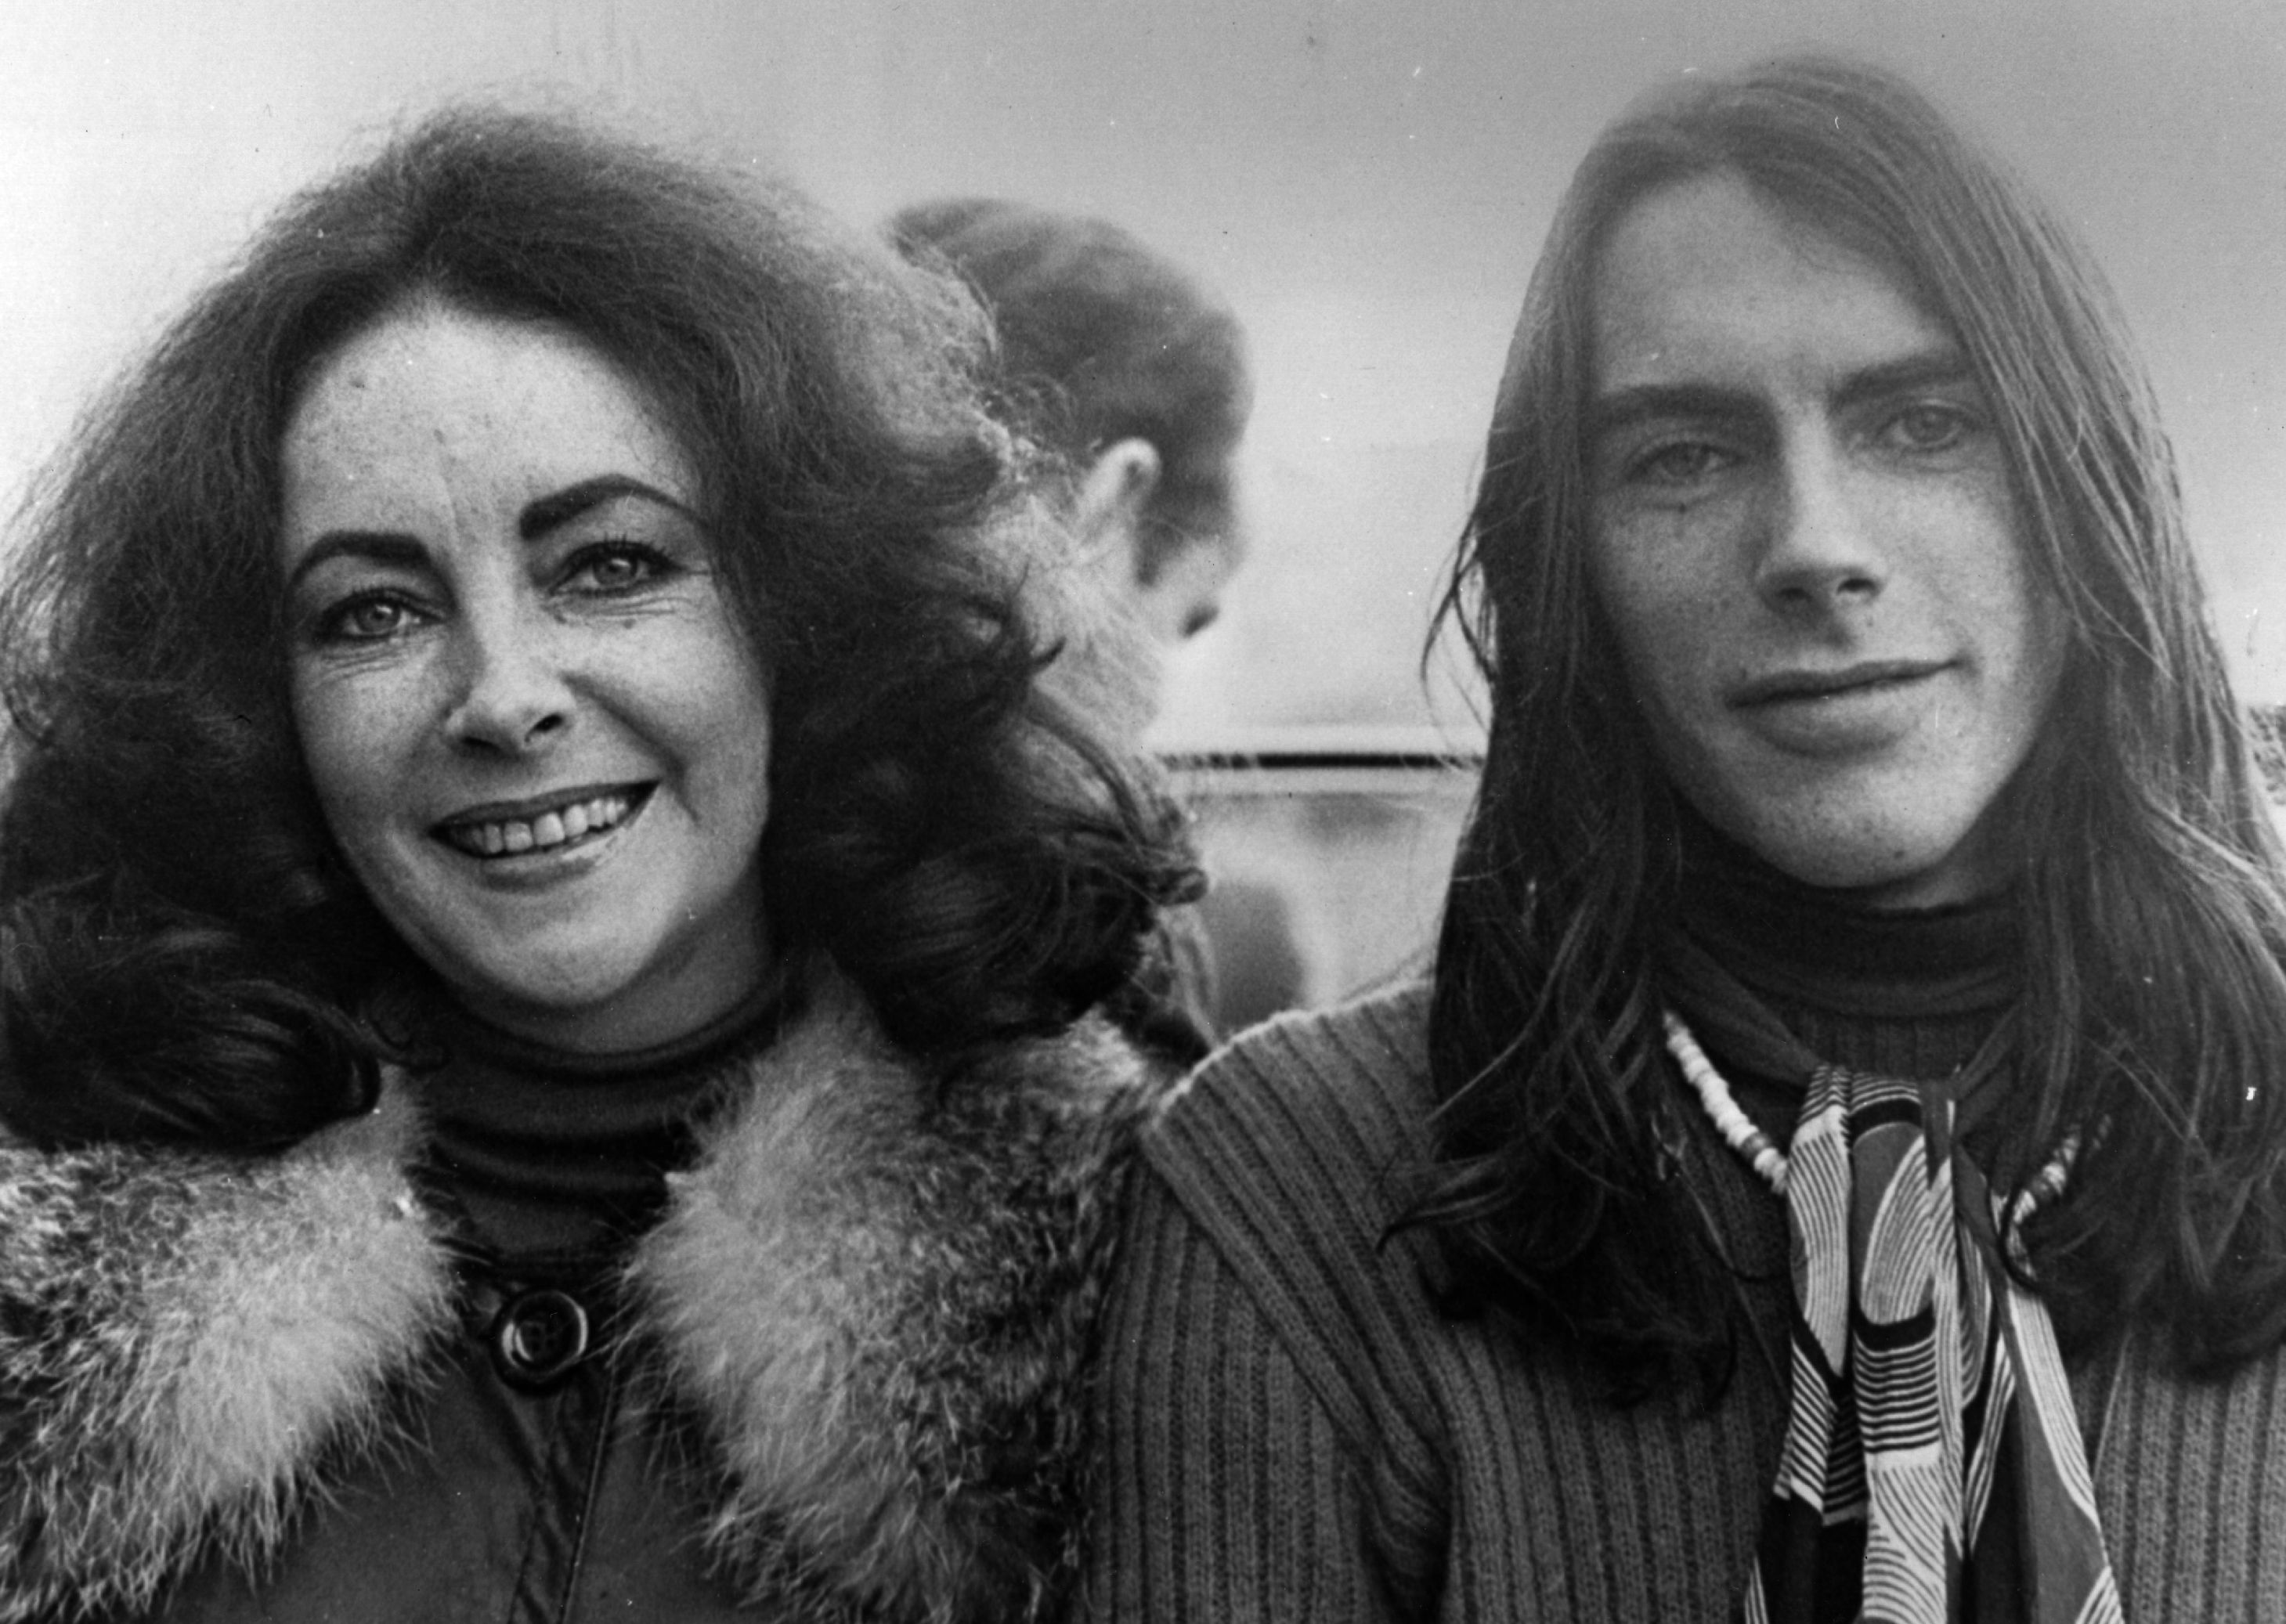 Elizabeth Taylor sees her son, Michael Wilding Jr., for the first time in six years on November 24, 1975, at Ffynonwen Farm in Wales. | Source: Getty Images